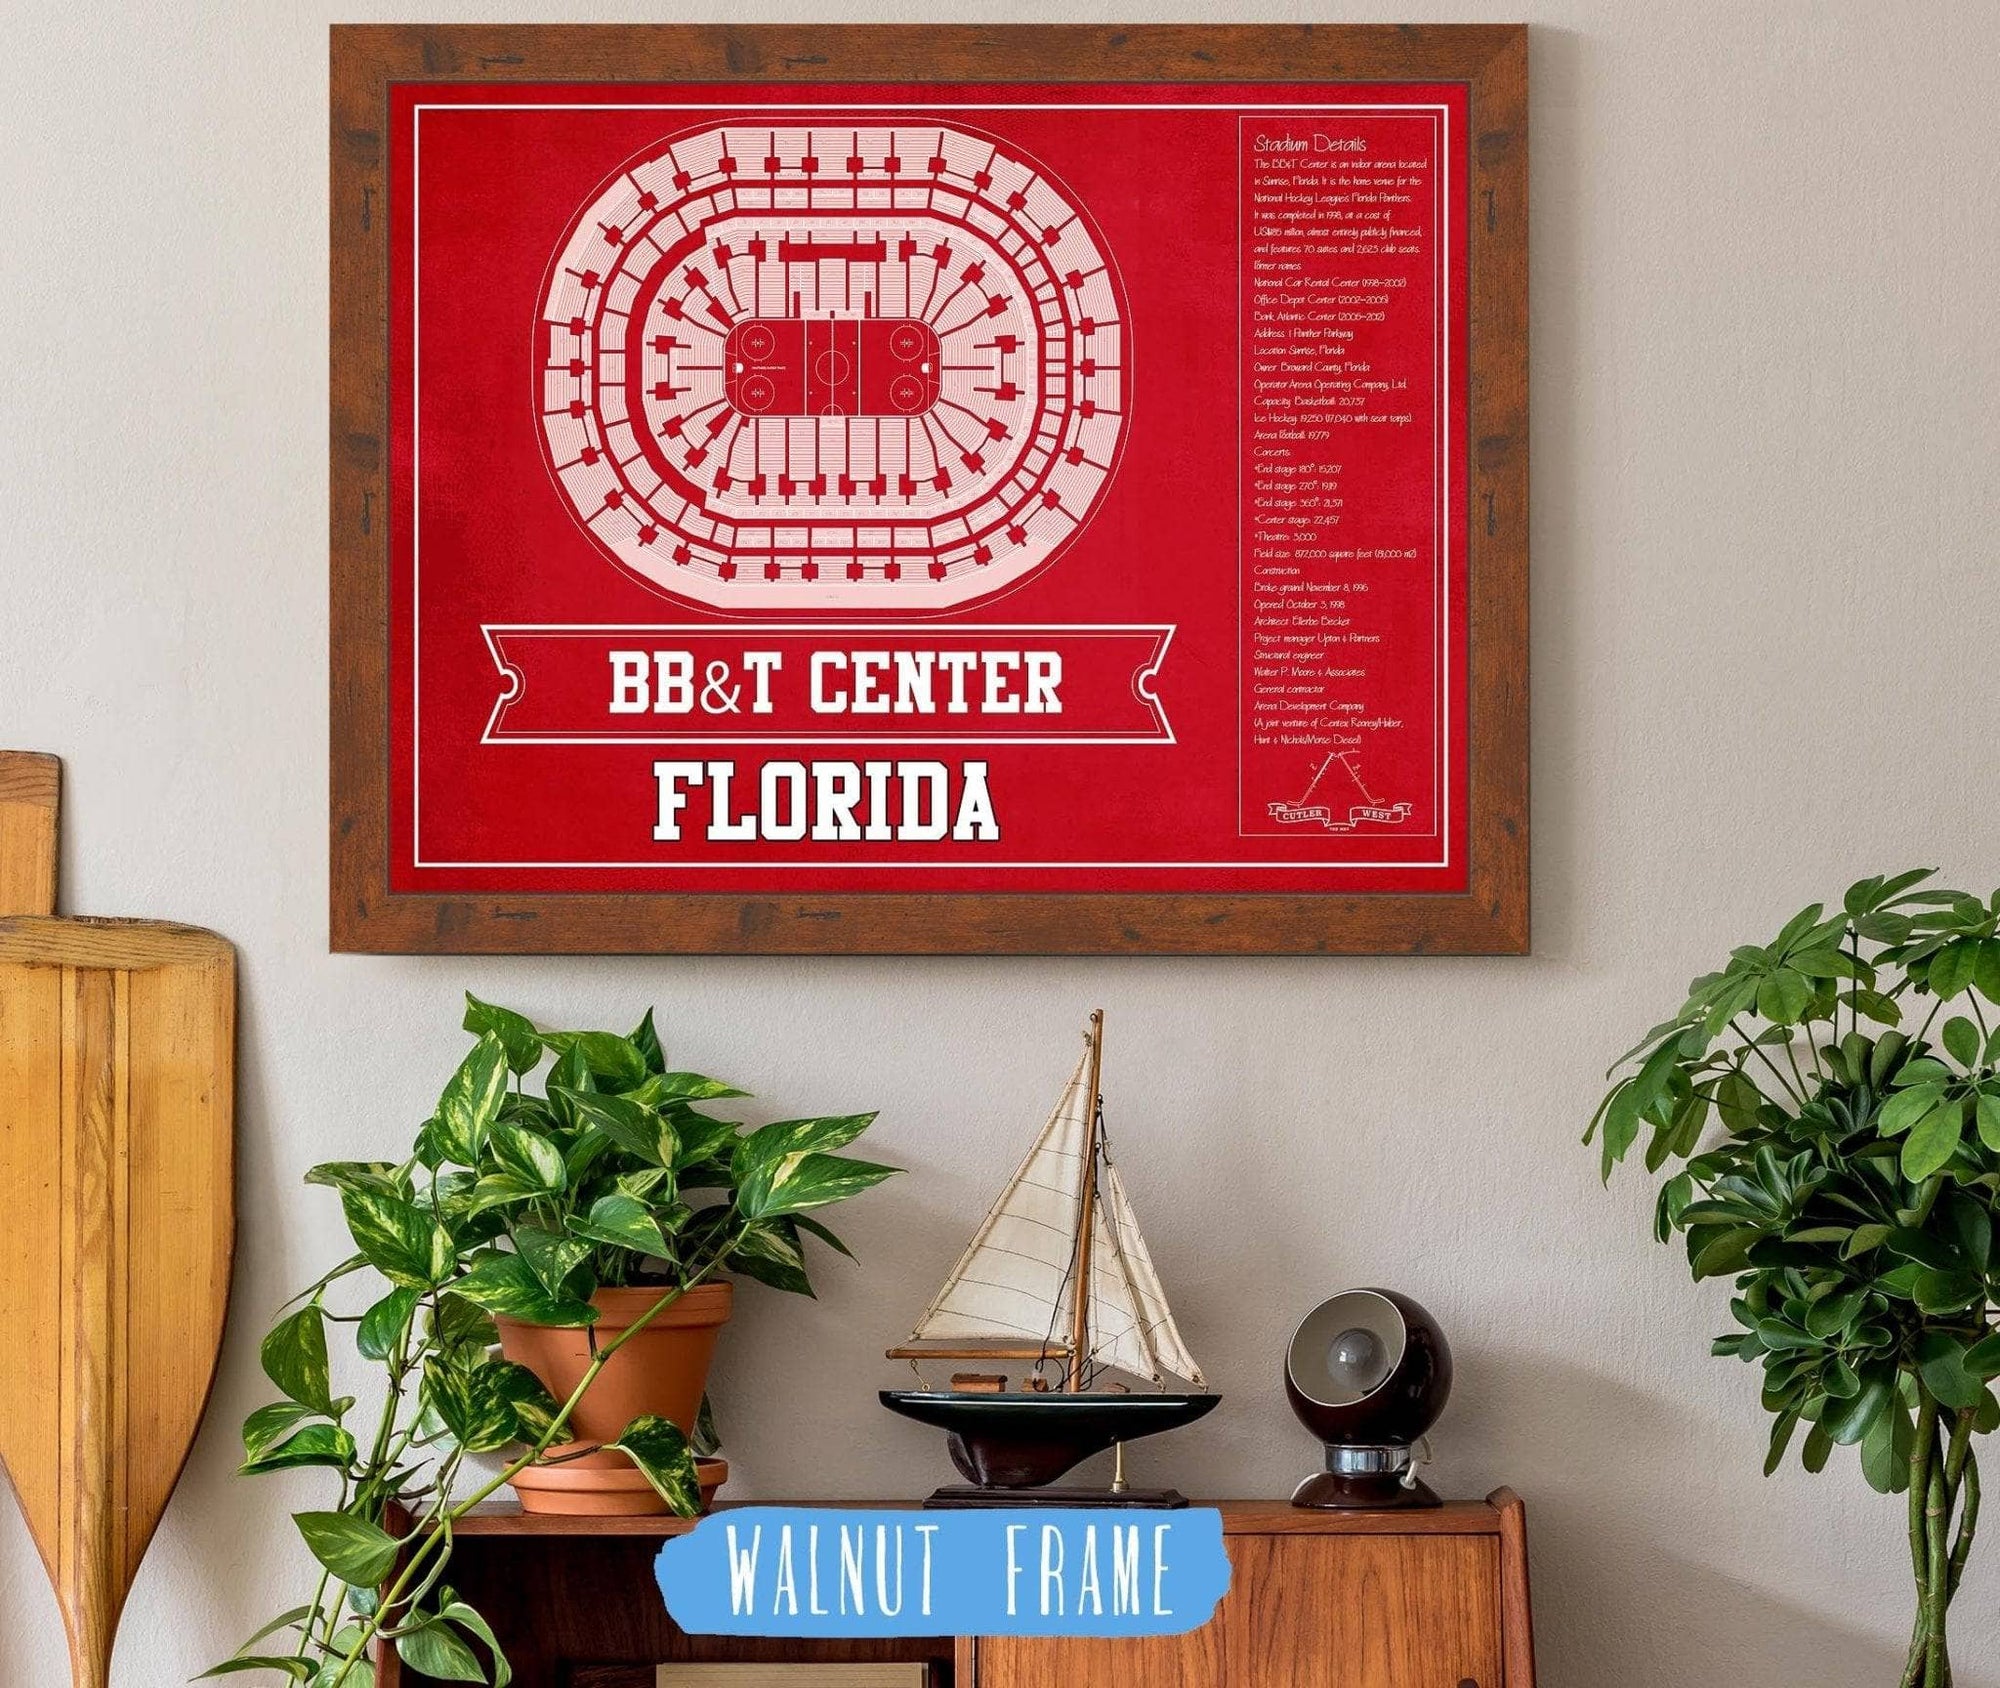 Cutler West 14" x 11" / Walnut Frame Florida Panthers BB&T Center Seating Chart - Vintage Hockey Team Color Print 659981334-TEAM